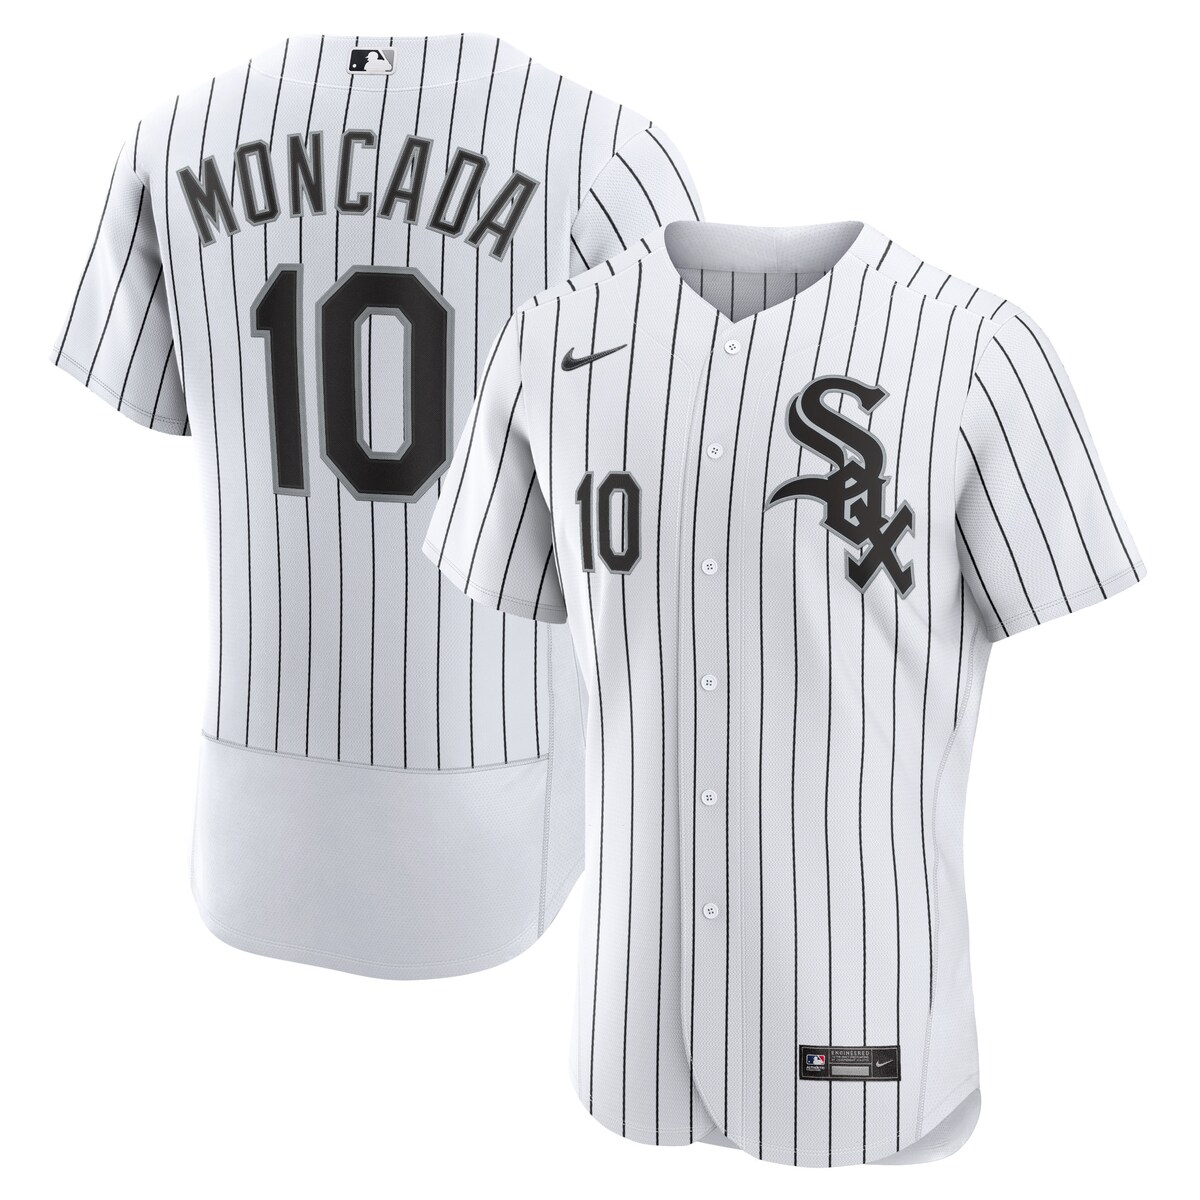 Whether you're watching from the couch or within the stadium, you'll be the biggest Chicago White Sox fan around when you sport this Yoan Moncada Home Authentic Player Jersey! This Nike jersey features bold Chicago White Sox graphics that will showcase your team pride no matter where you watch the game. Pair this jersey with your favorite Chicago White Sox hat to create the ultimate fan look.Authentic JerseyFull-button frontJersey Color Style: HomeWorn by players on fieldMachine washMaterial: 100% PolyesterImportedRounded hemMLB Batterman CFX patch on center back neckMoisture-wicking fabricOfficially licensedSewn-on tackle twill graphicsBrand: NikeFit: Athletic cut